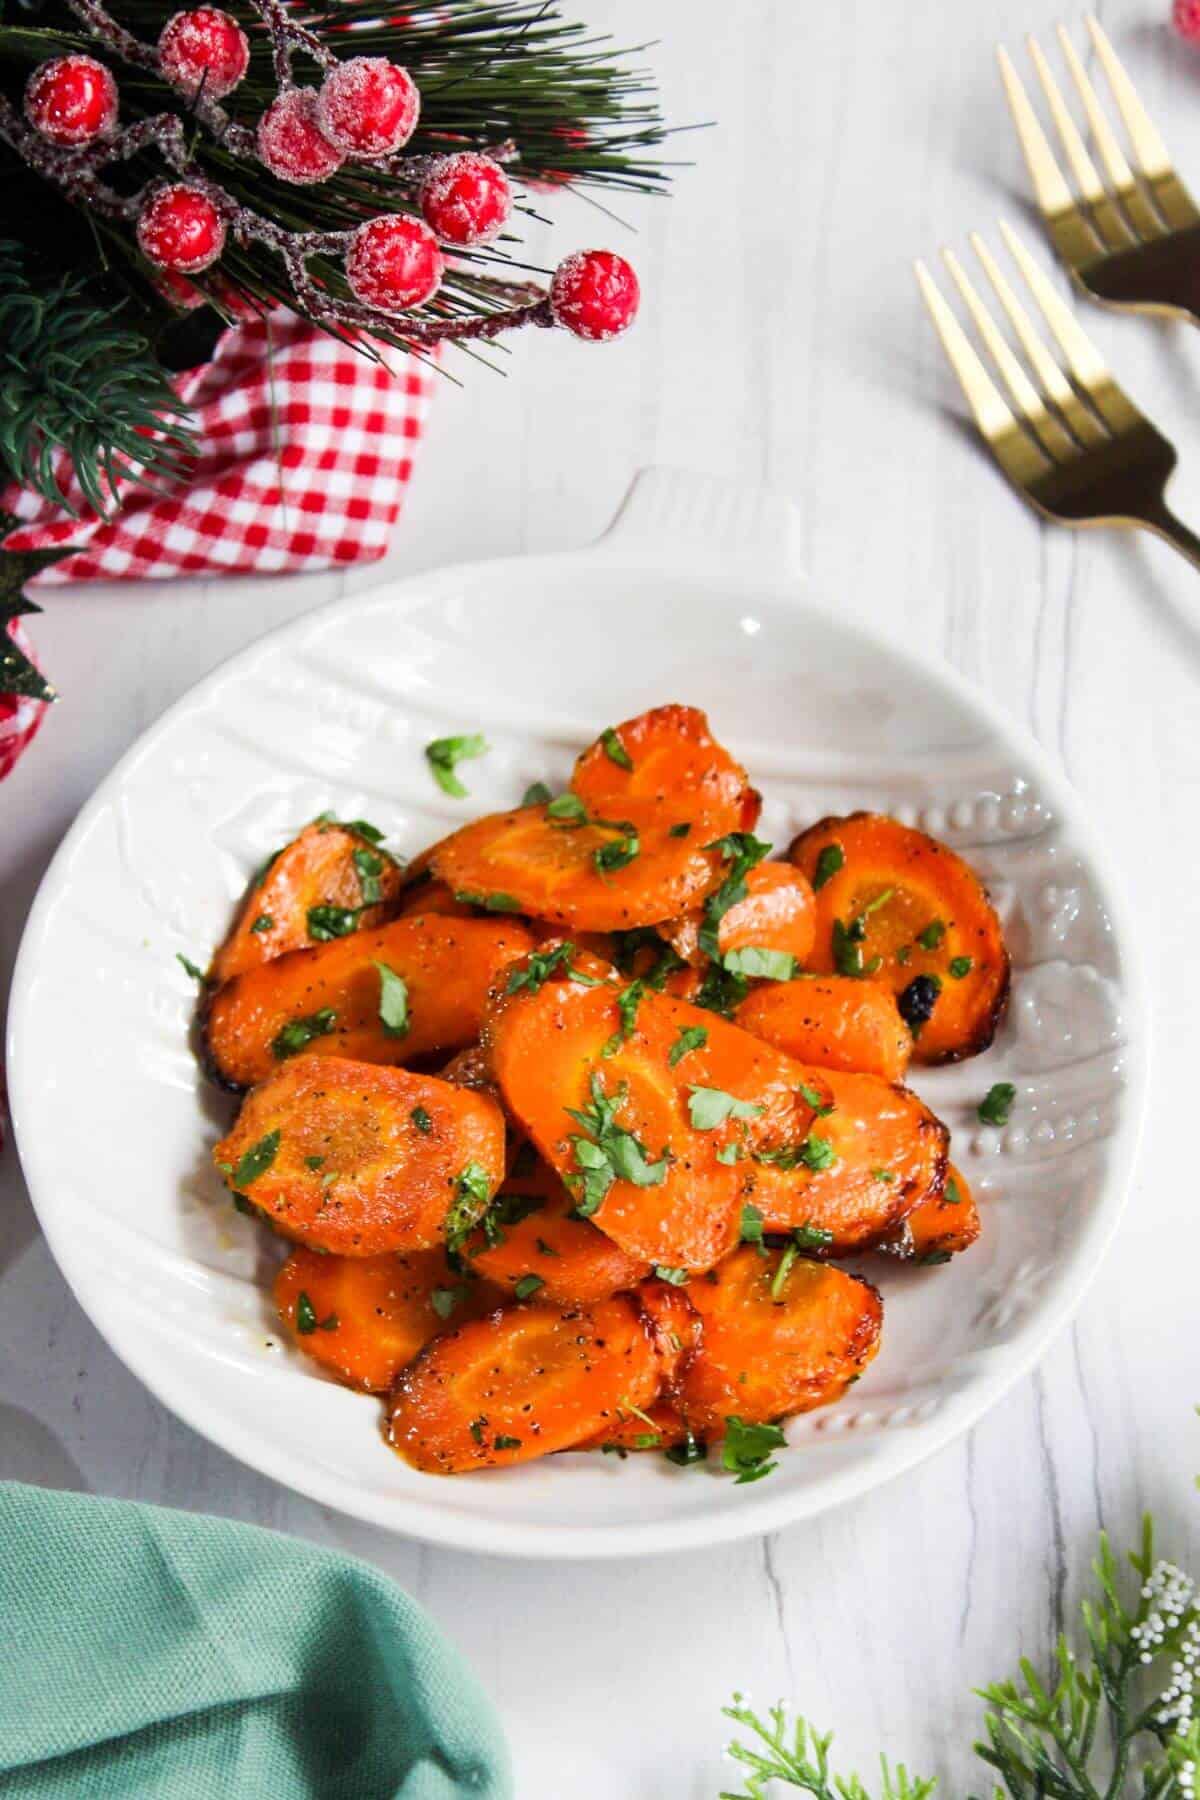 Maple glazed carrots with parsley on a white plate.